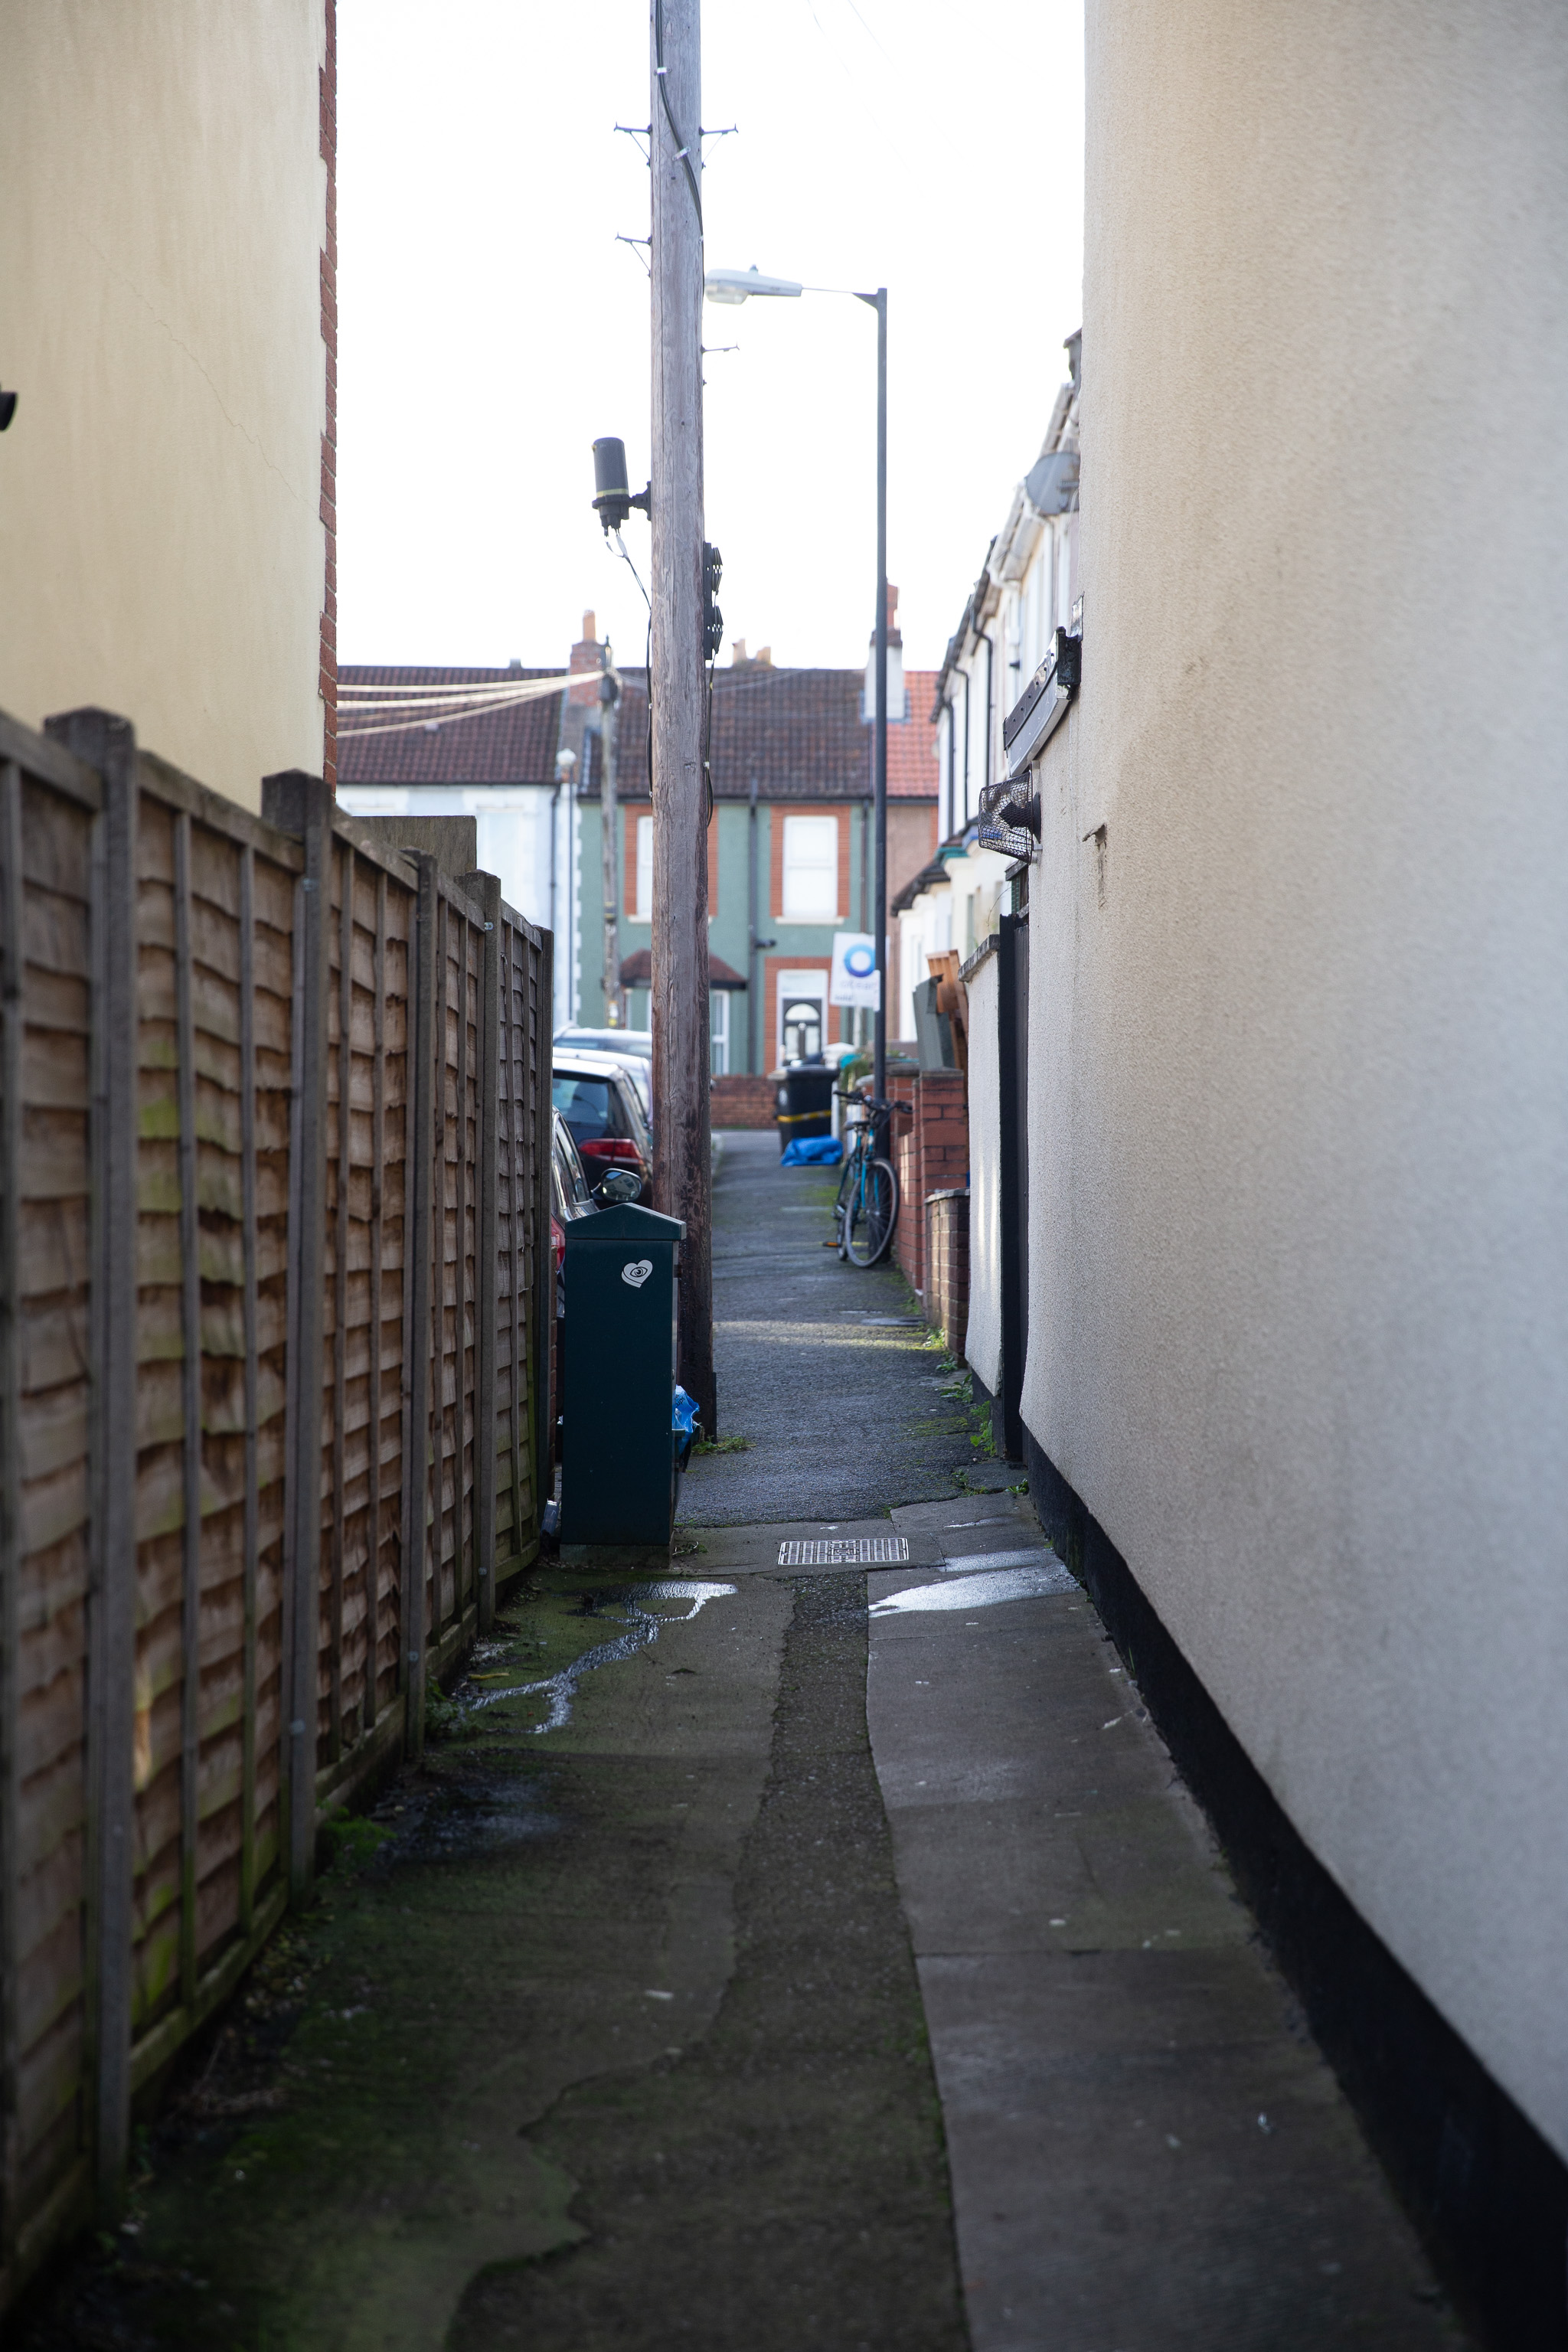 Alleyway
Between Lindrea Street and Crowther Street
